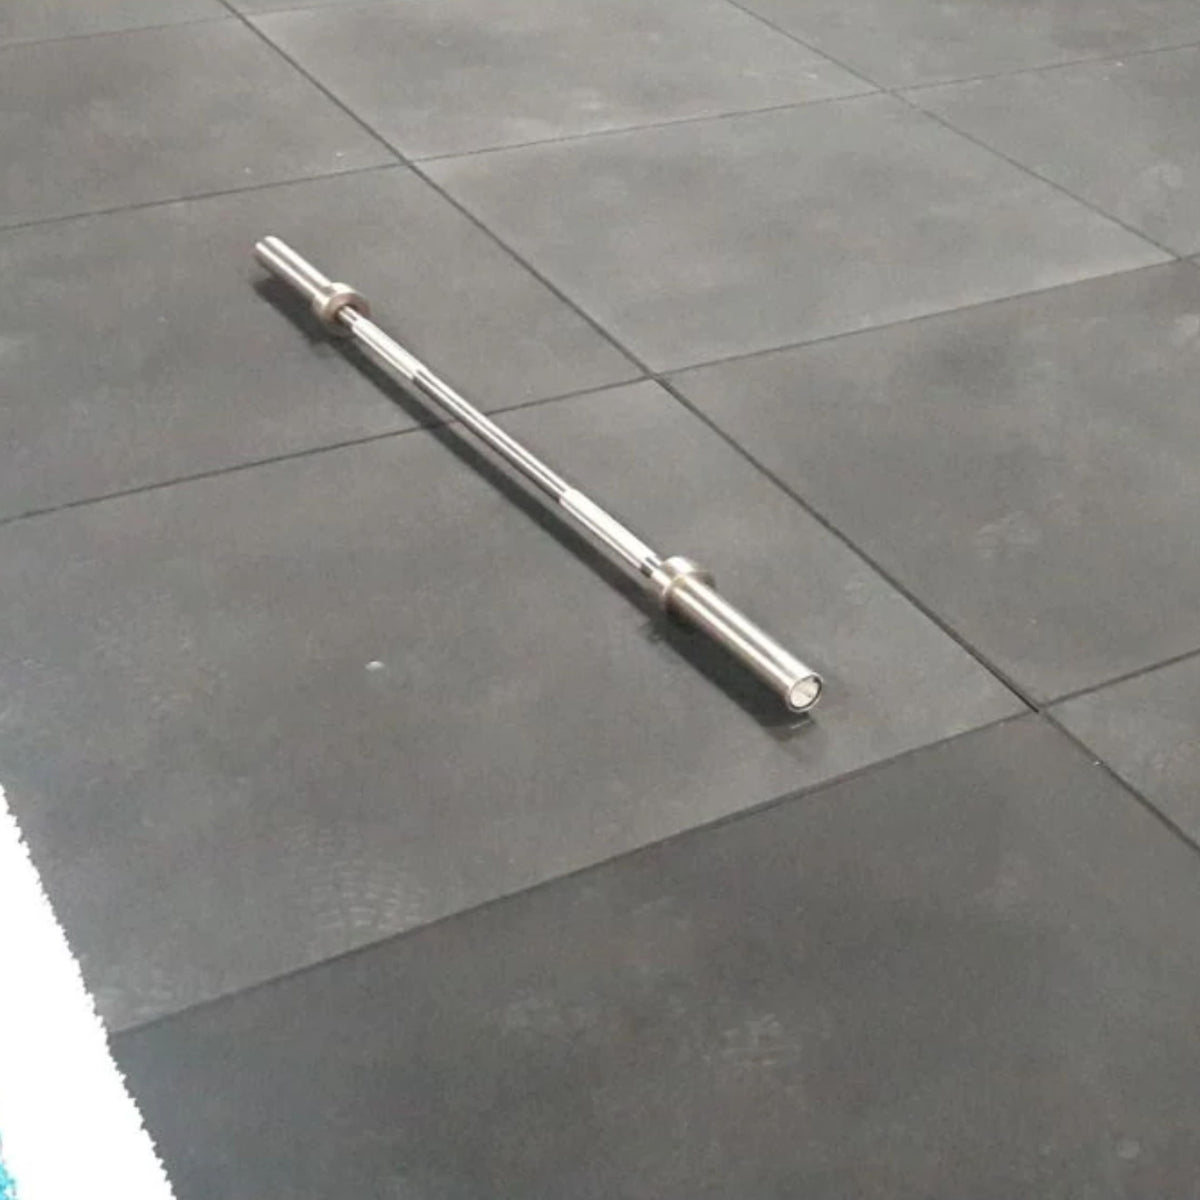 Flatline Pro Black Rubber Gym Flooring 1m x 1m x 20mm from Cannons UK, from just £24.49 m2 - Cannons UK